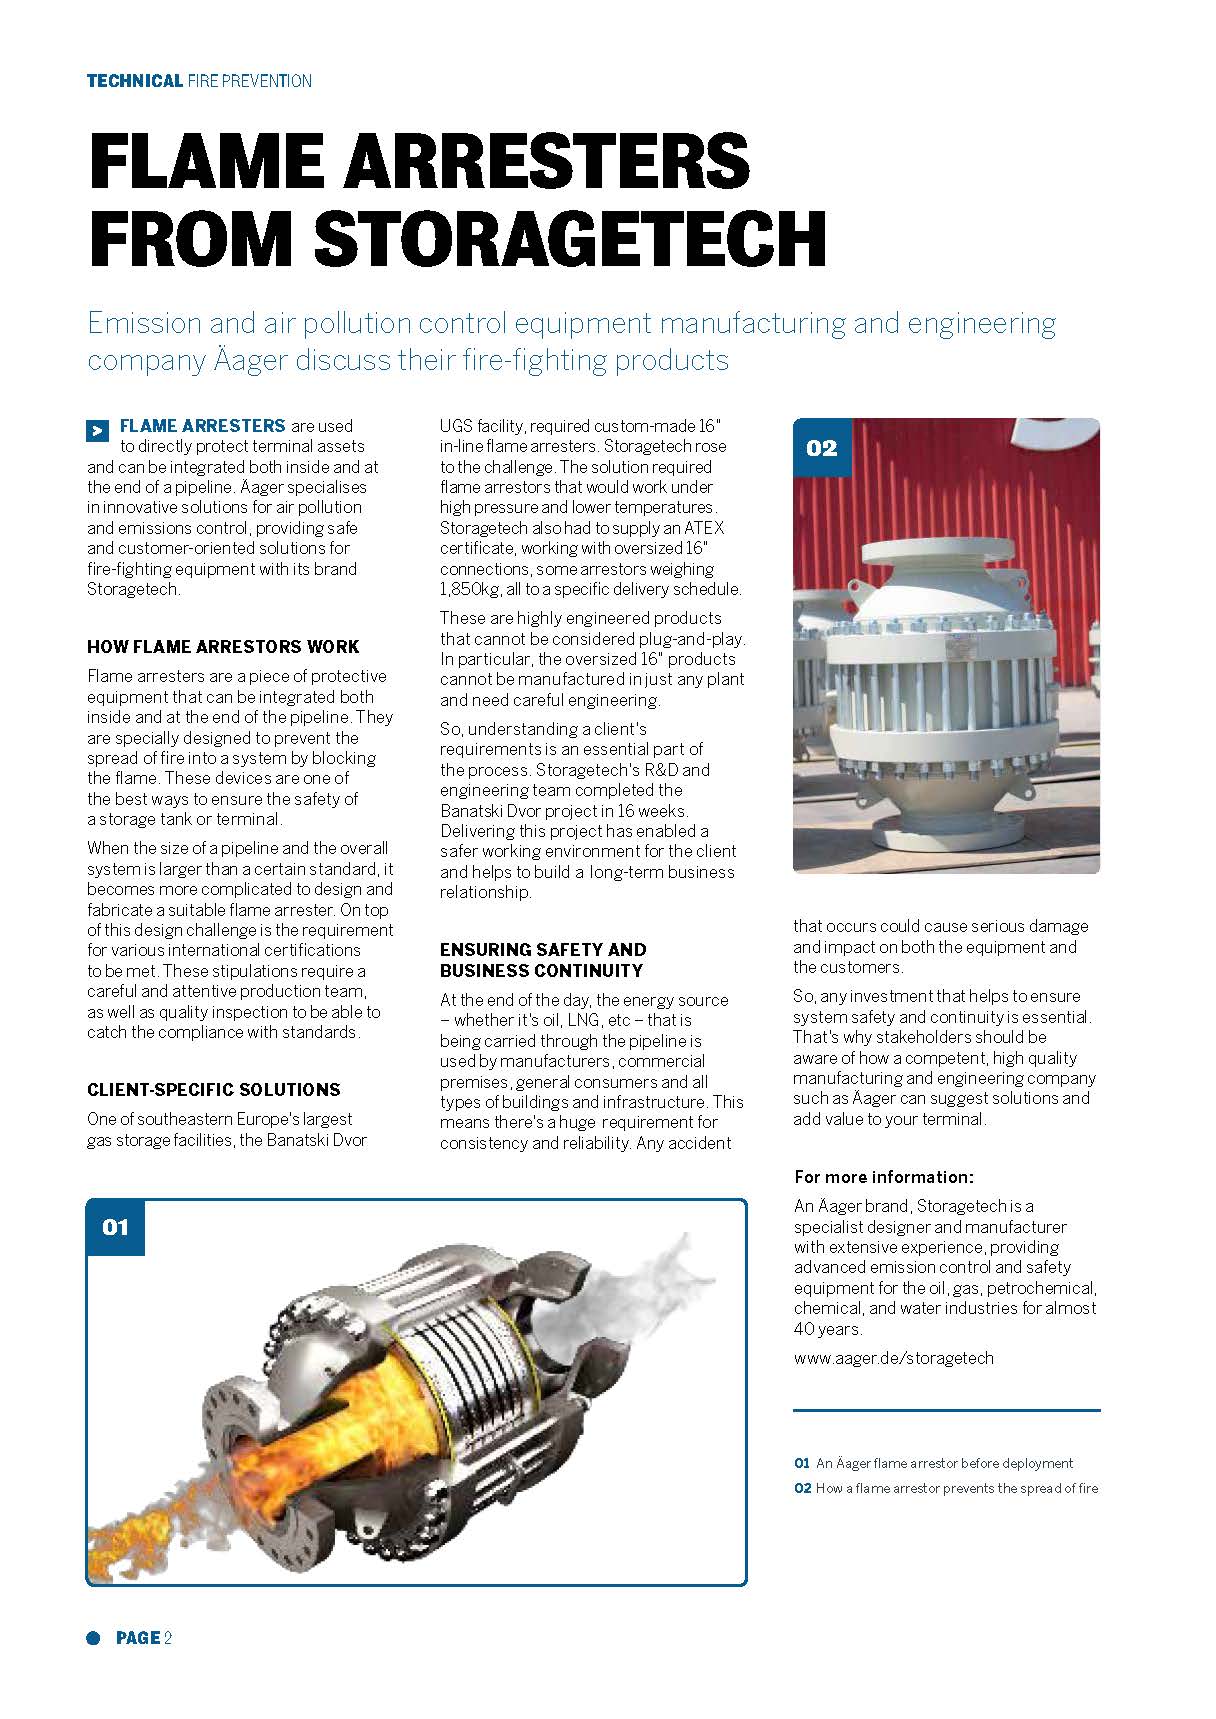 Customer-Oriented Flame Arresters from Storagetech – Tank Storage Magazine Article 25